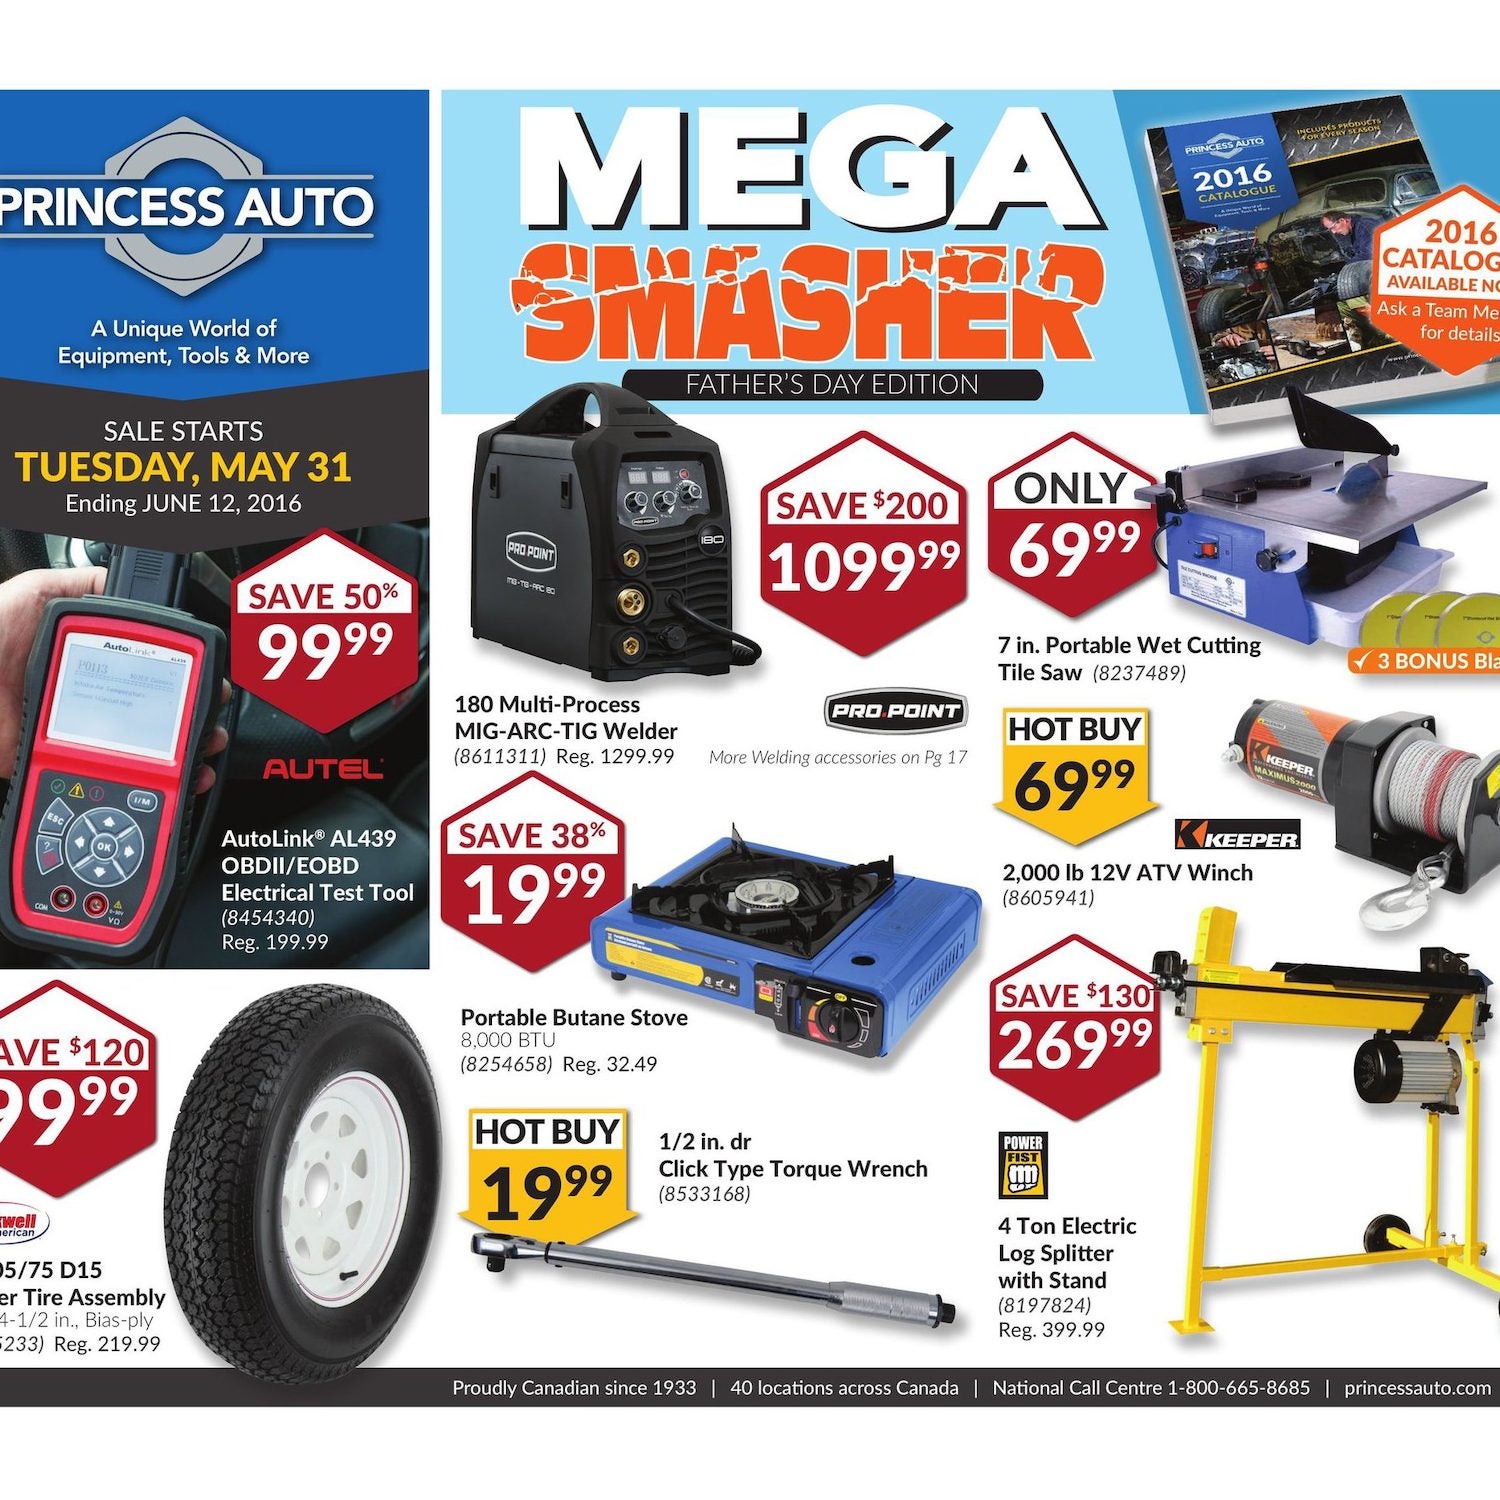 Princess Auto Weekly Flyer Mega Smasher Father s Day Edition